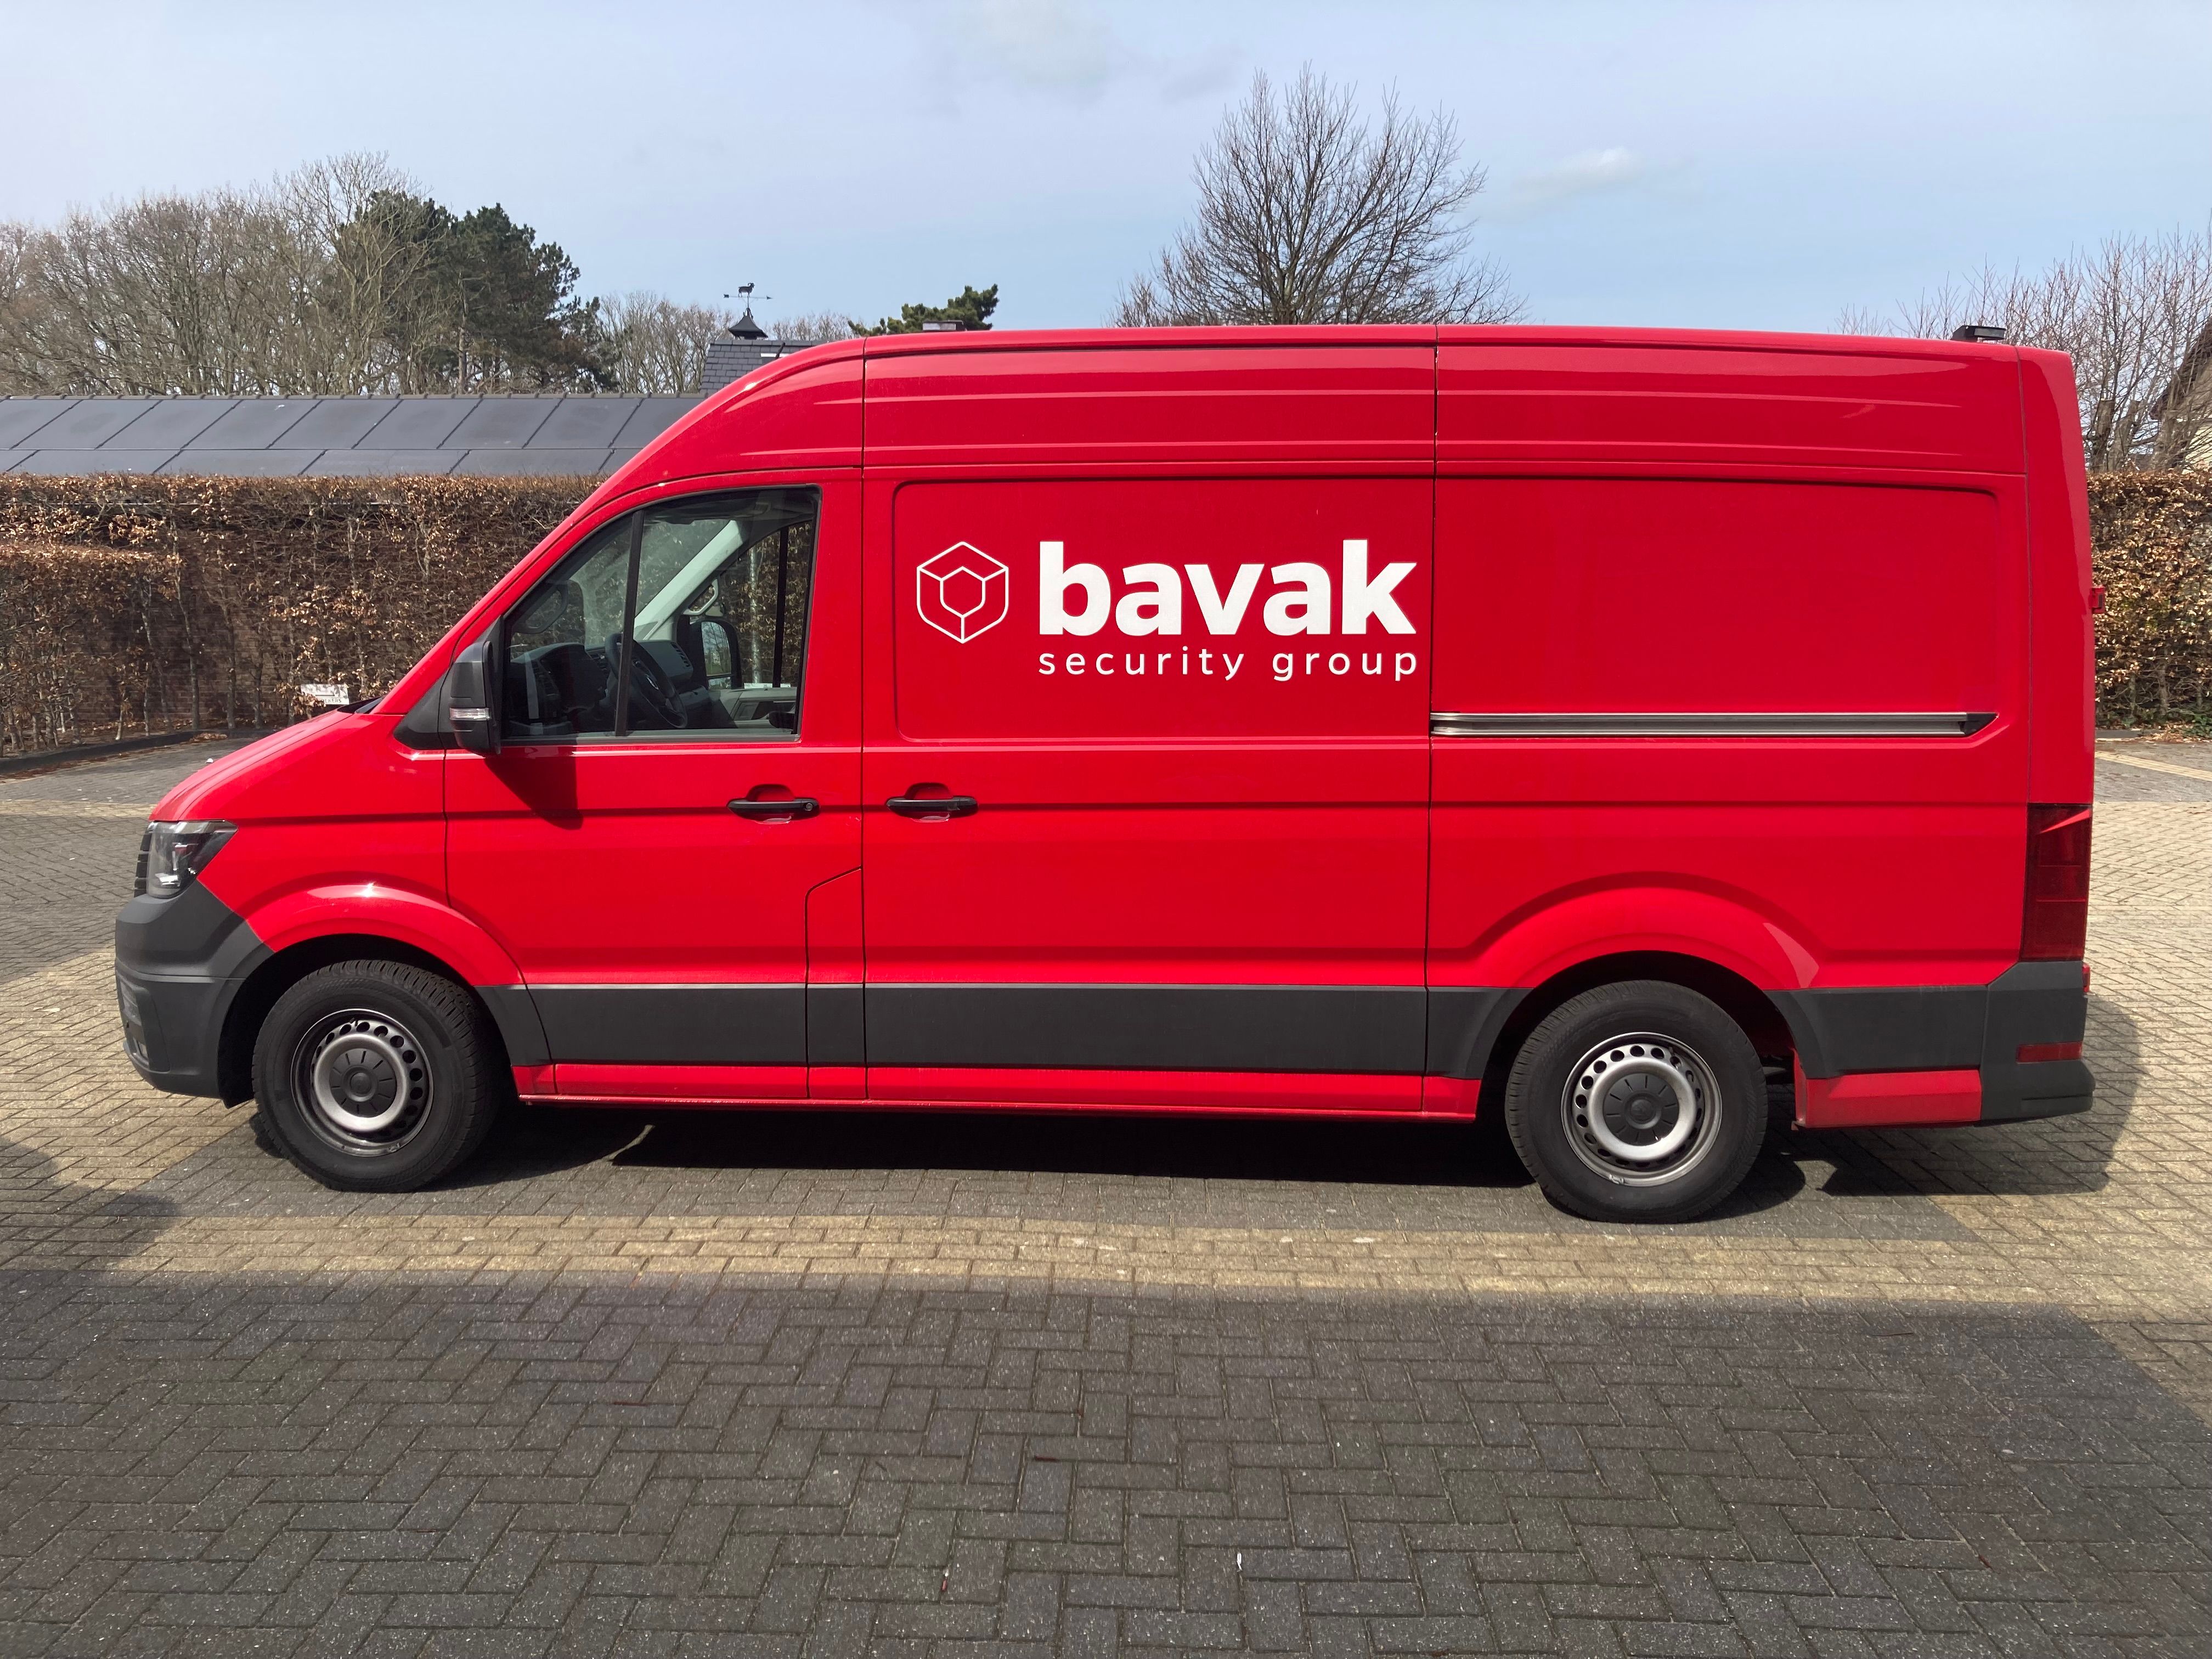 The history of Bavak Security Group